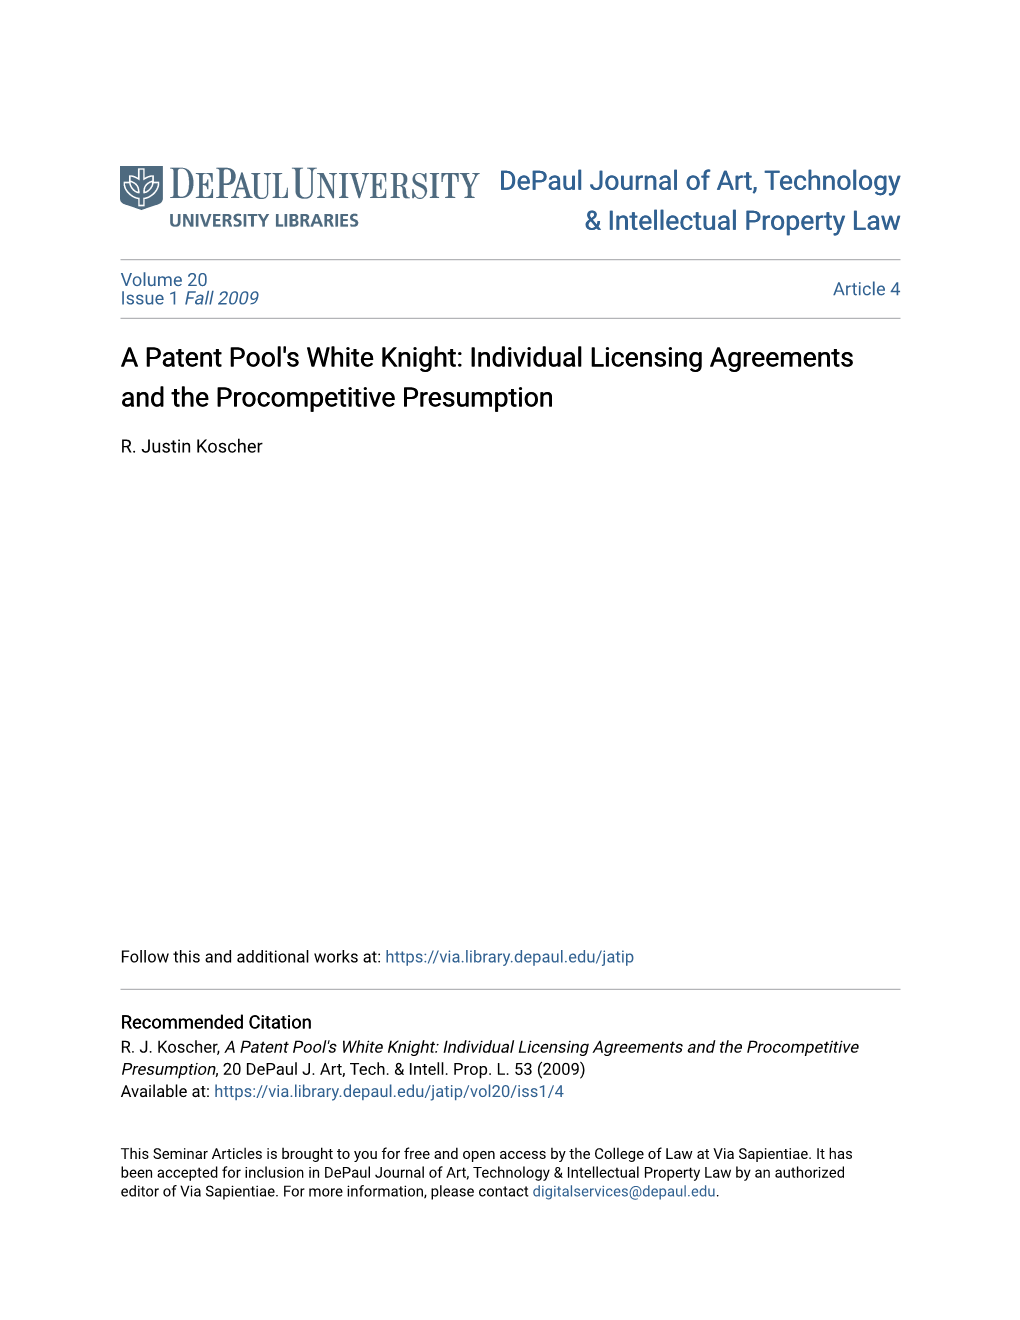 A Patent Pool's White Knight: Individual Licensing Agreements and the Procompetitive Presumption